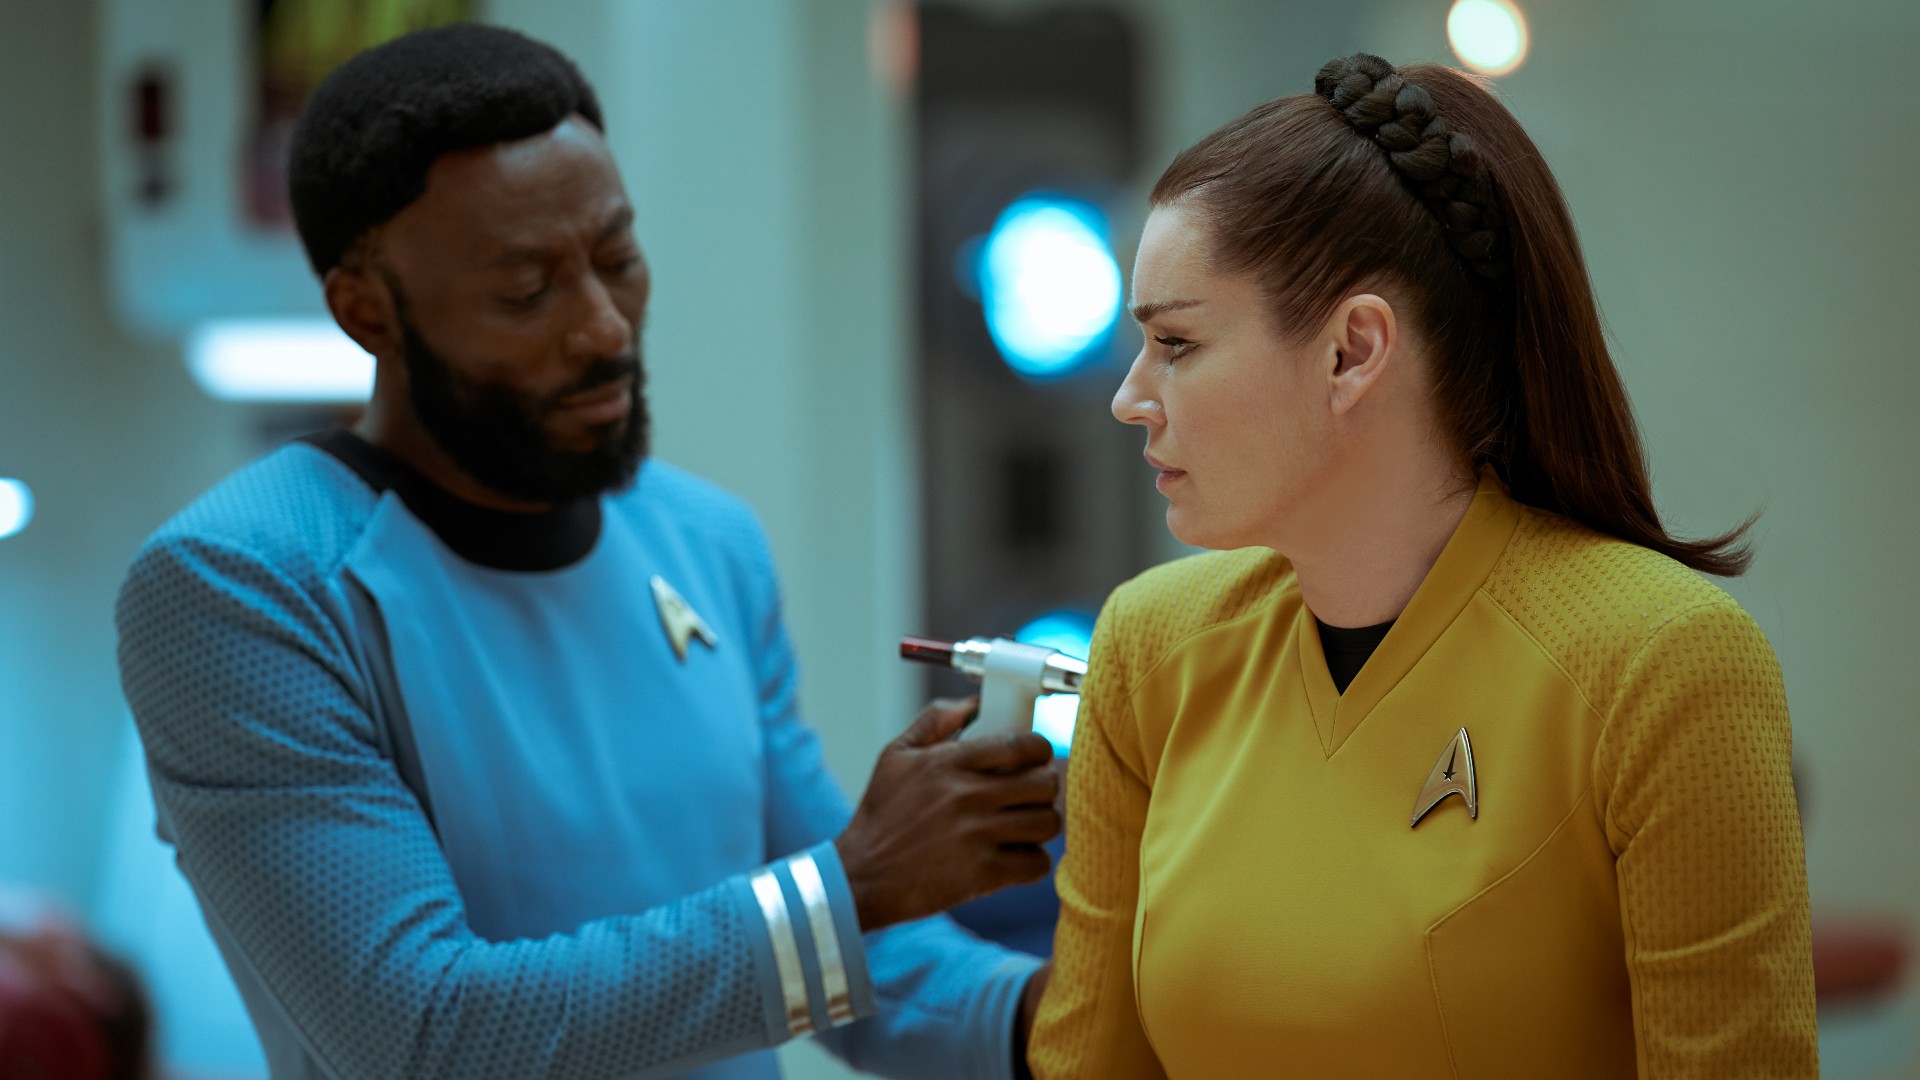 Star Trek: Strange New Worlds season 1, episode 4 review: “Embraces every opportunity to ratchet up the stakes”ByRichard Edwardspublished 26 May 22Review